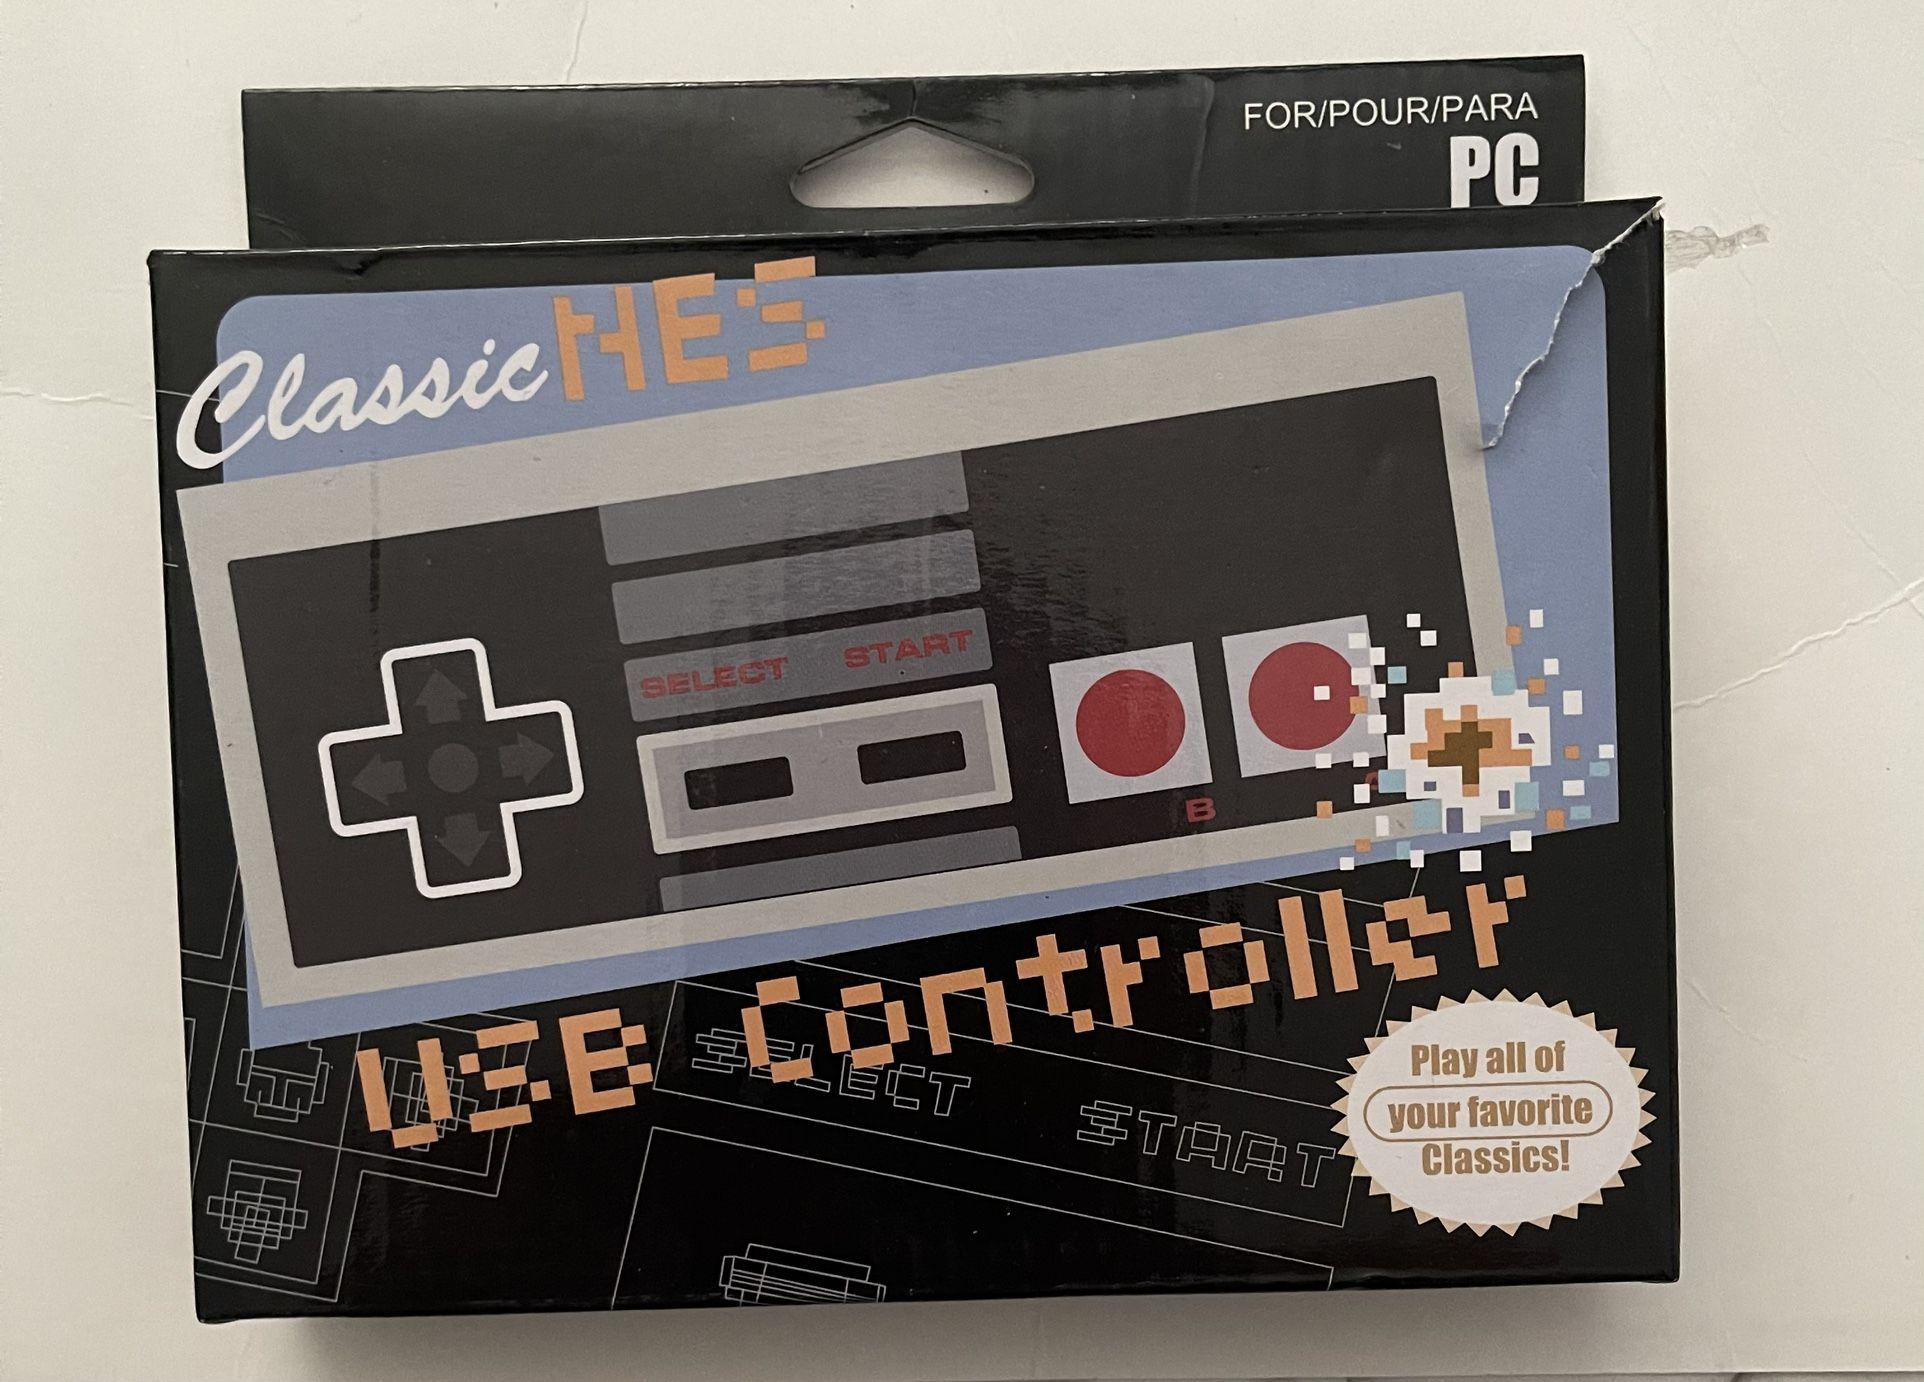 I have brand new controllers for NES for PC only brand new in the box